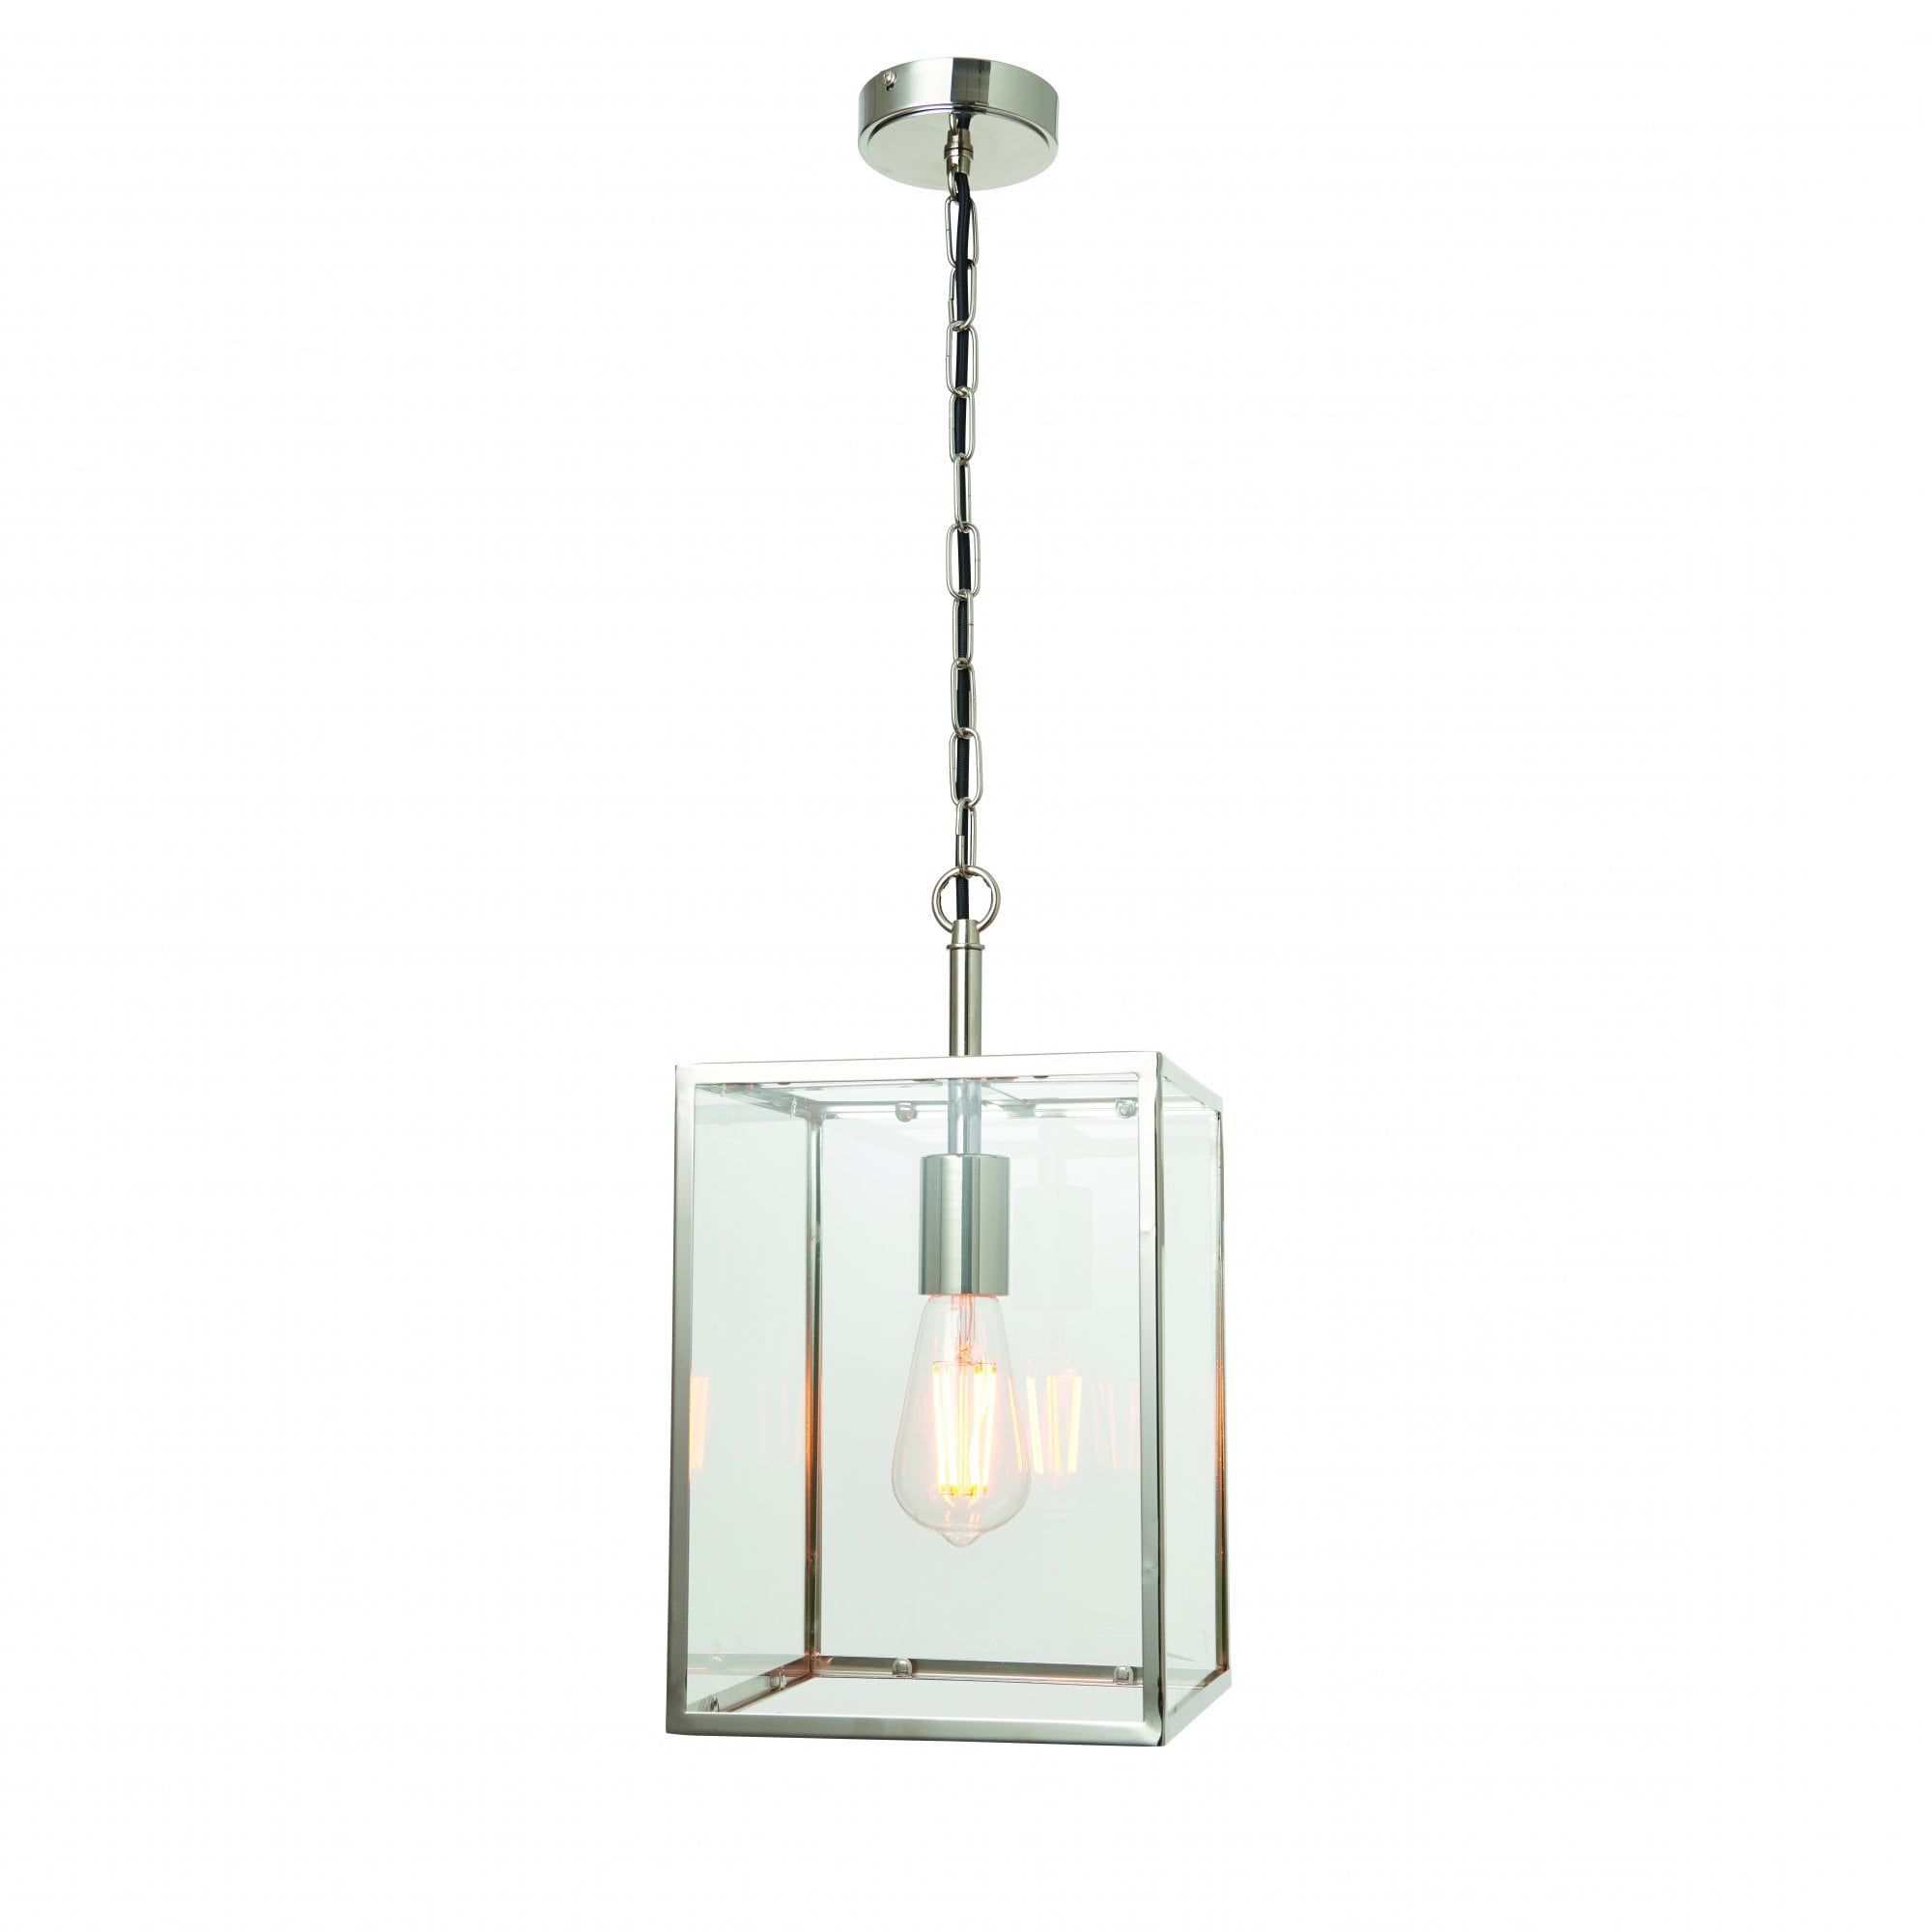 Pendant 40w Bright Nickel Plate & Clear Glass With Regard To Well Known Transparent Glass Lantern Chandeliers (View 2 of 10)